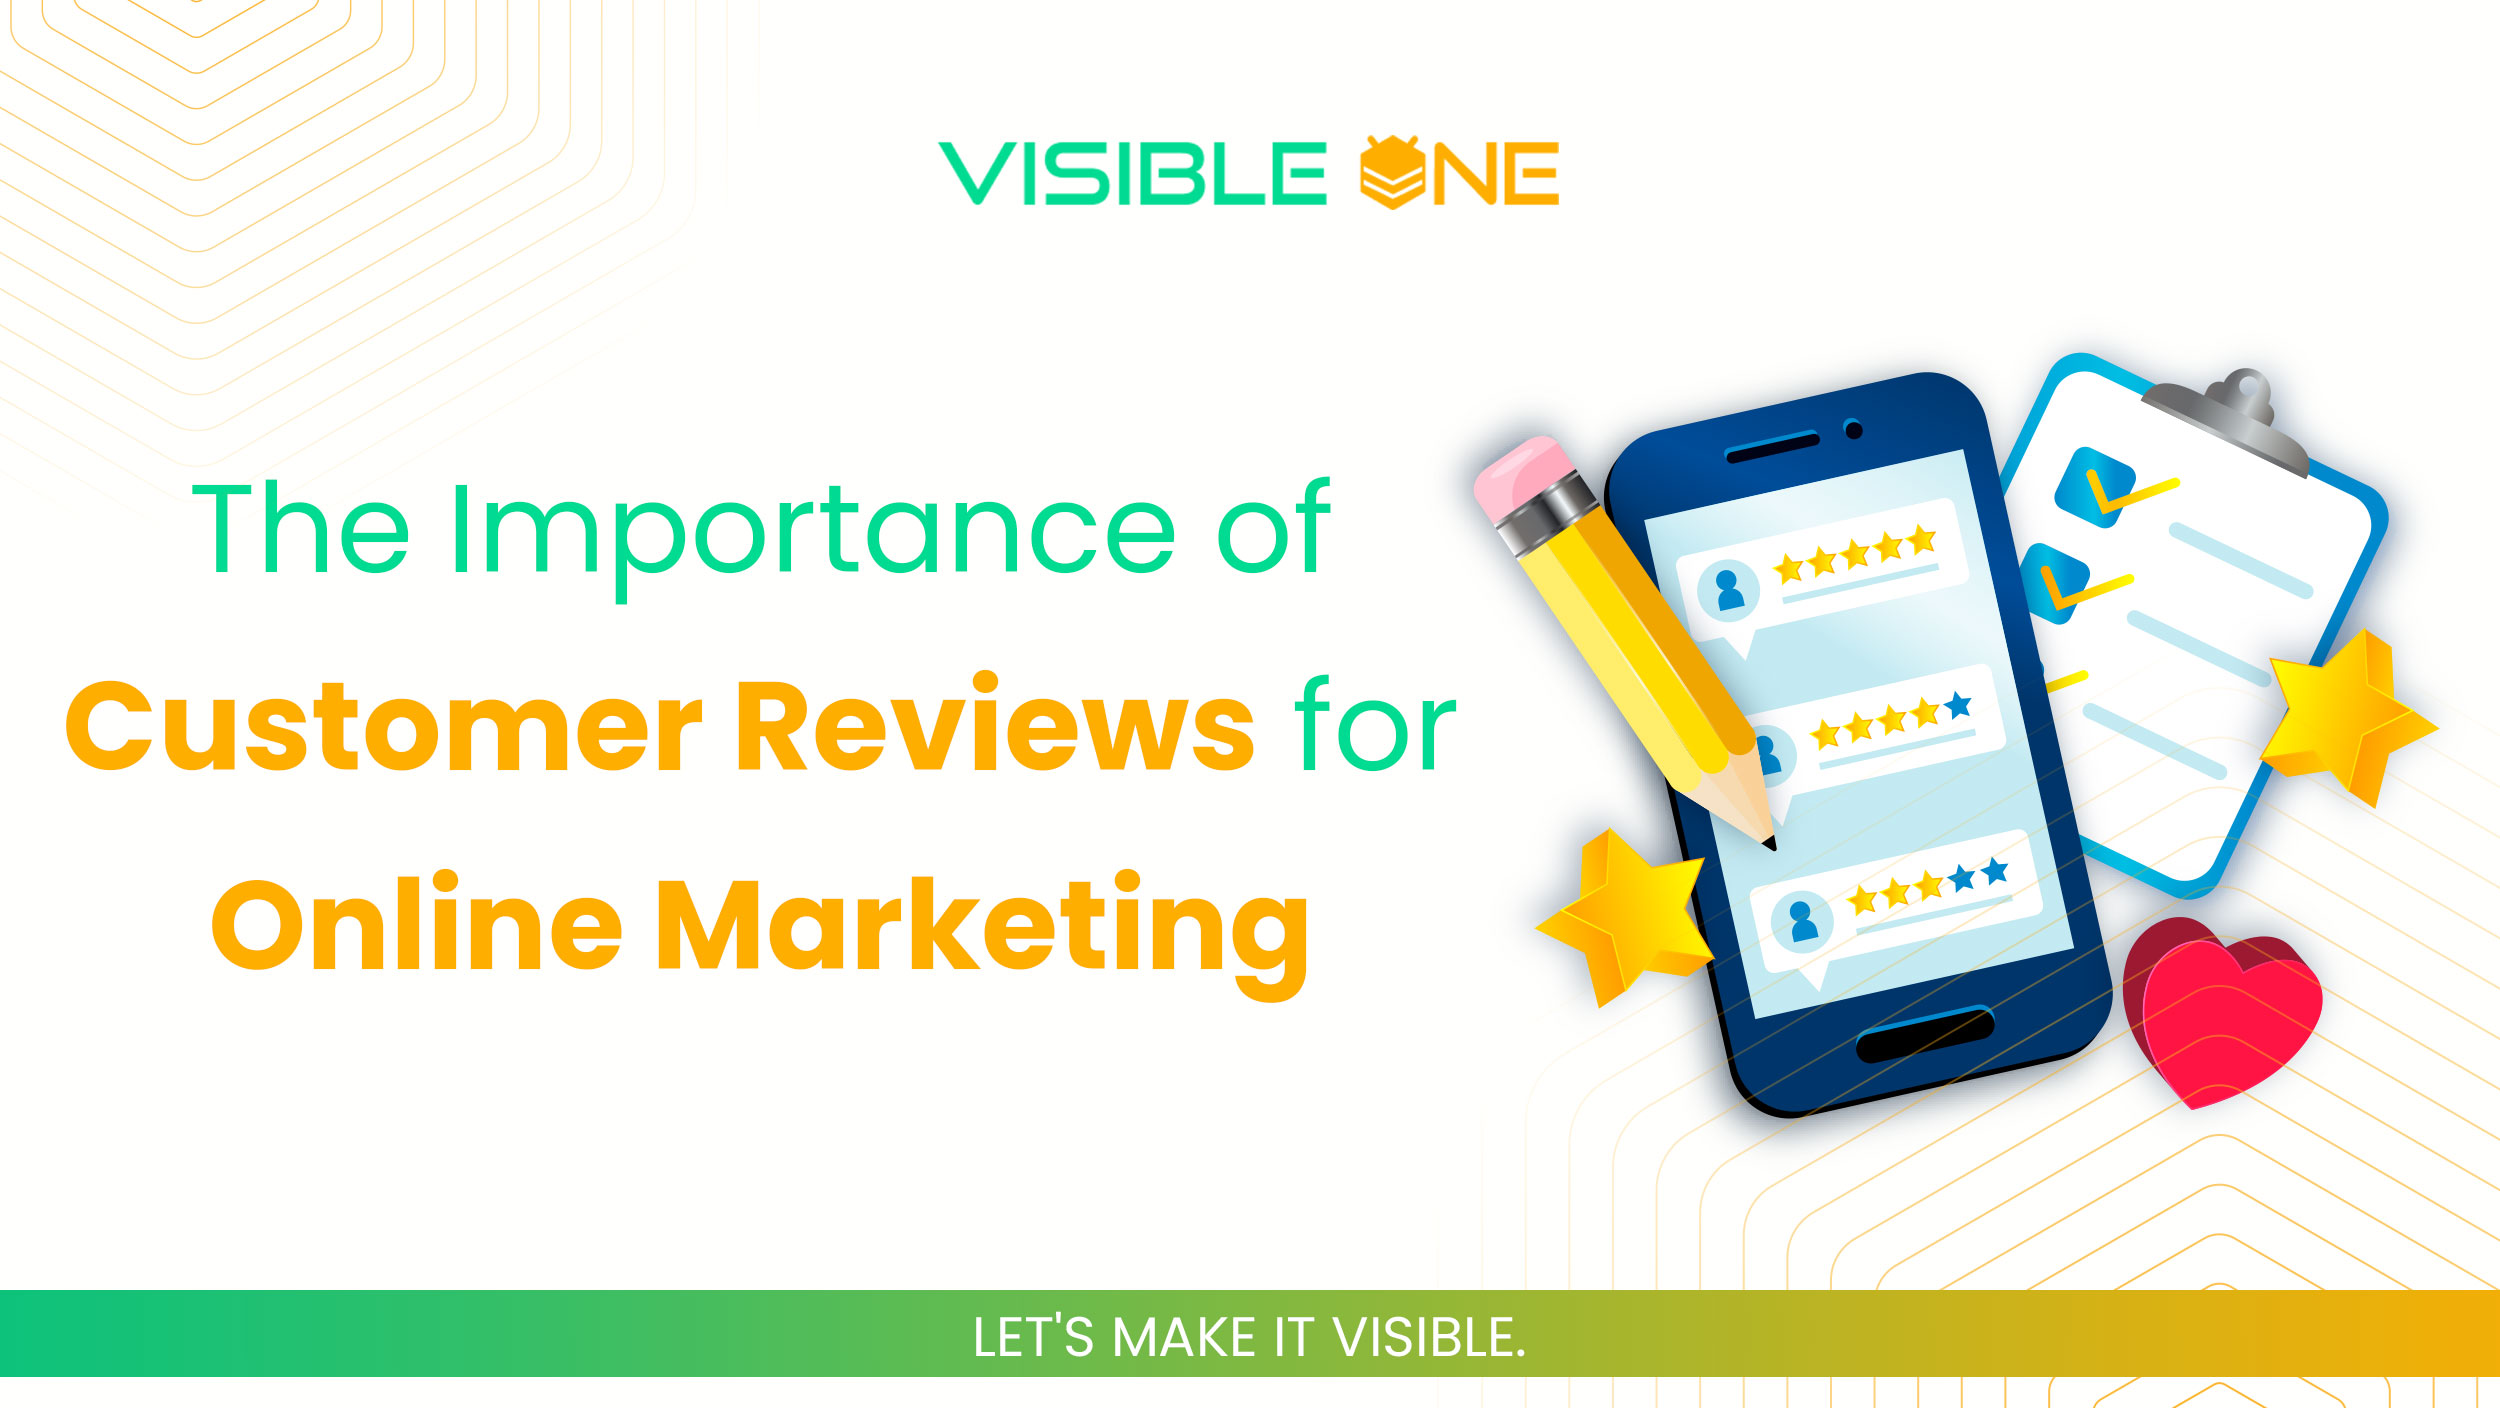 The Importance of Customer Reviews for Online Marketing